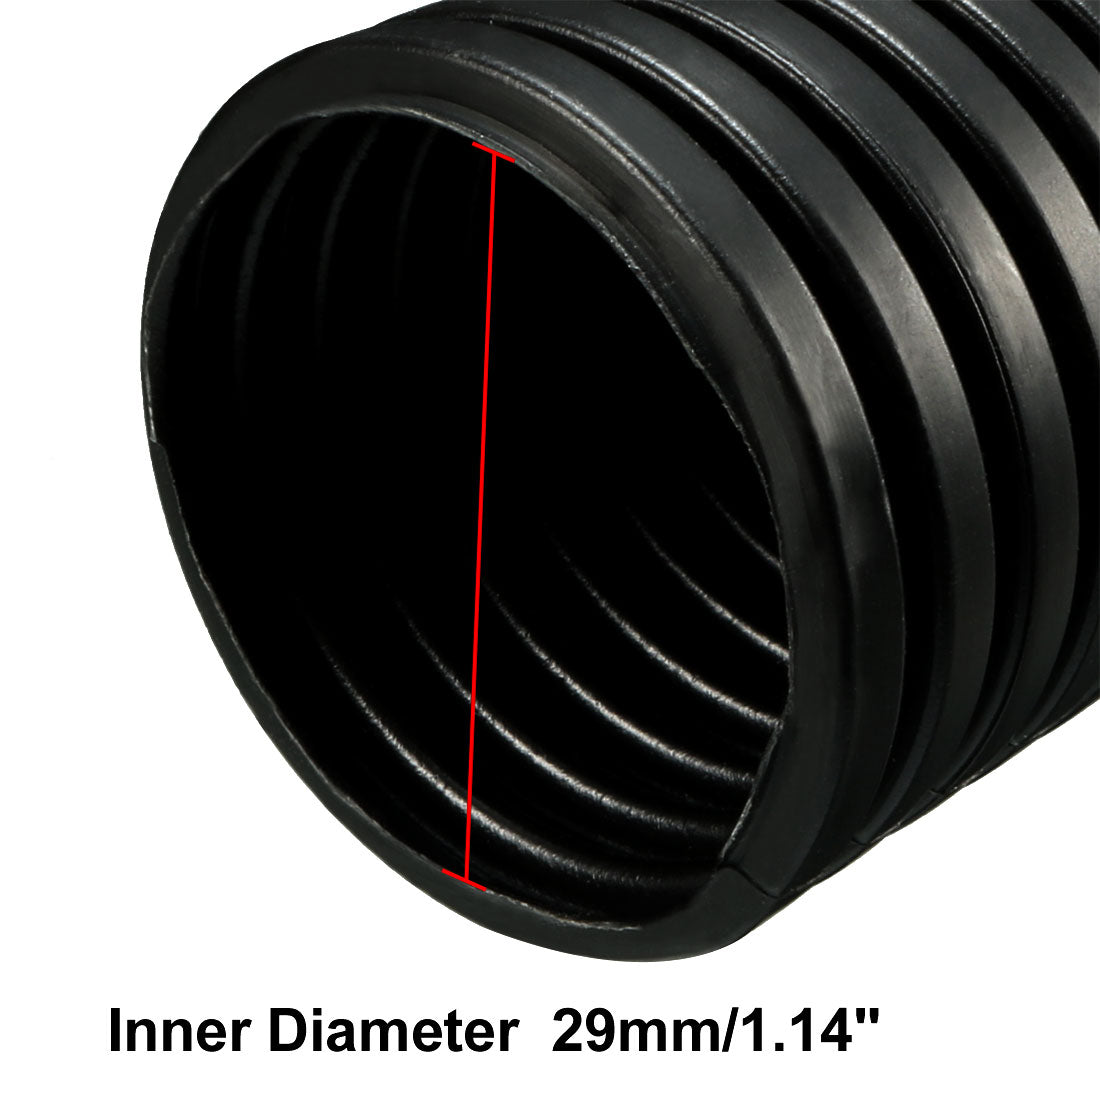 uxcell Uxcell 2 M 29 x 34.5 mm PP Flexible Corrugated Conduit Tube for Garden,Office Black